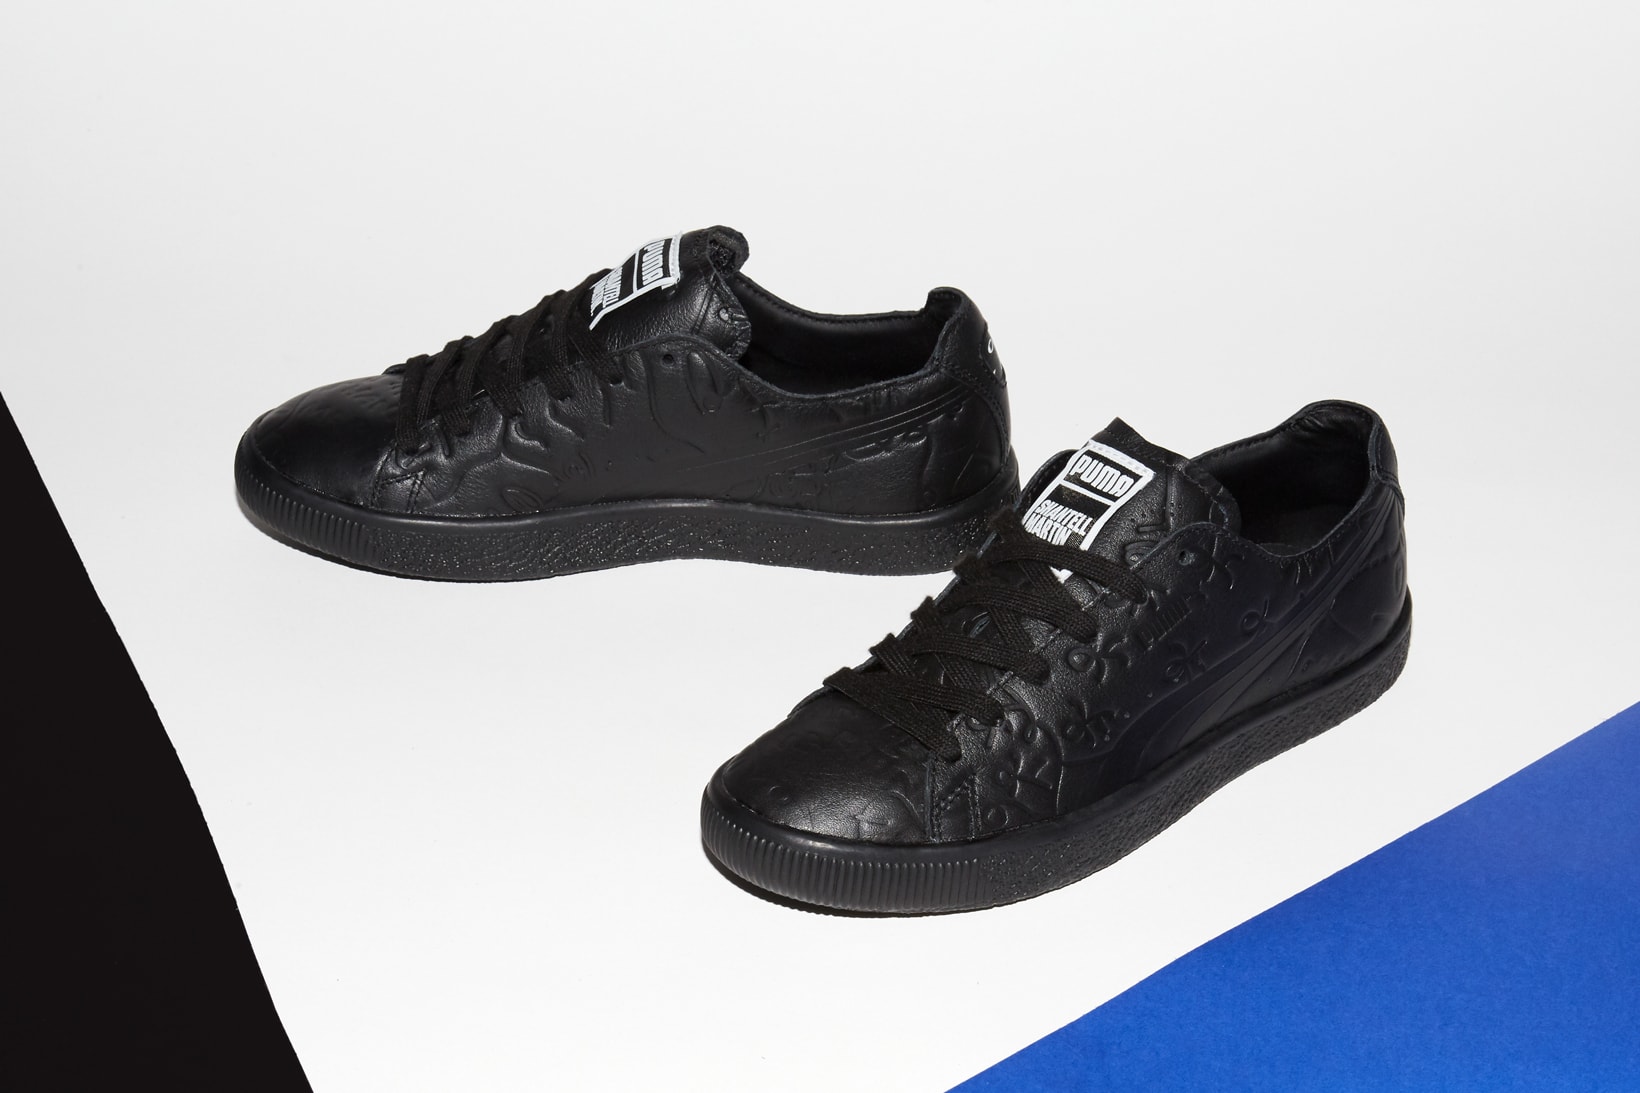 Shantell Martin x PUMA Spring/Summer 2018 Collection Black Clyde Sneakers